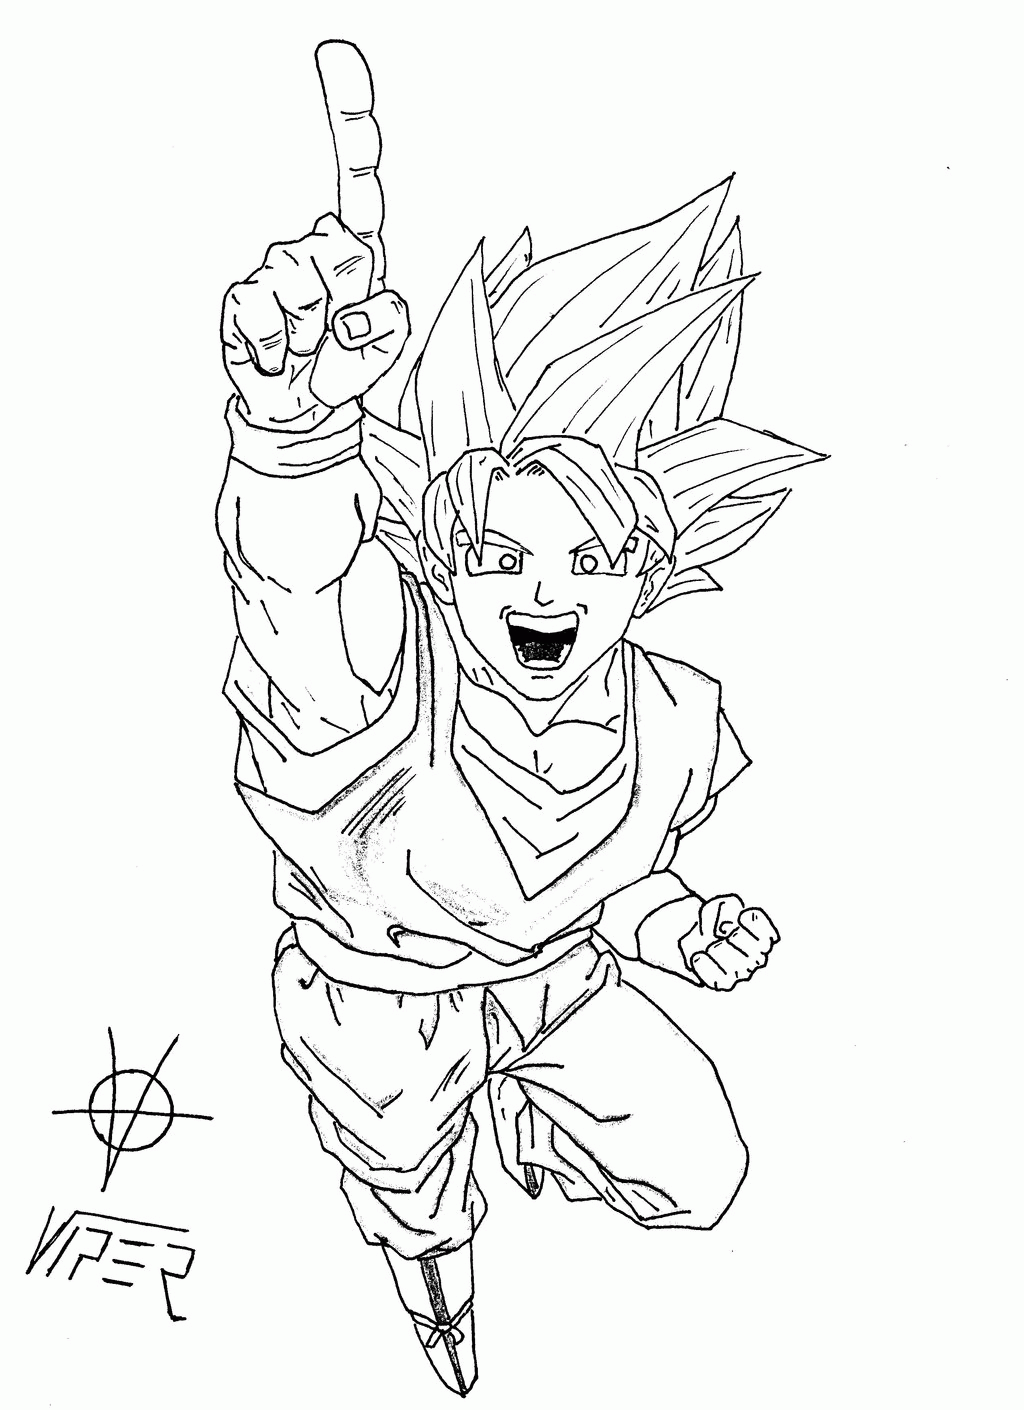 13 Pics of Goku SSJ4 Coloring Pages - How to Draw Goku SSJ4 Full ...